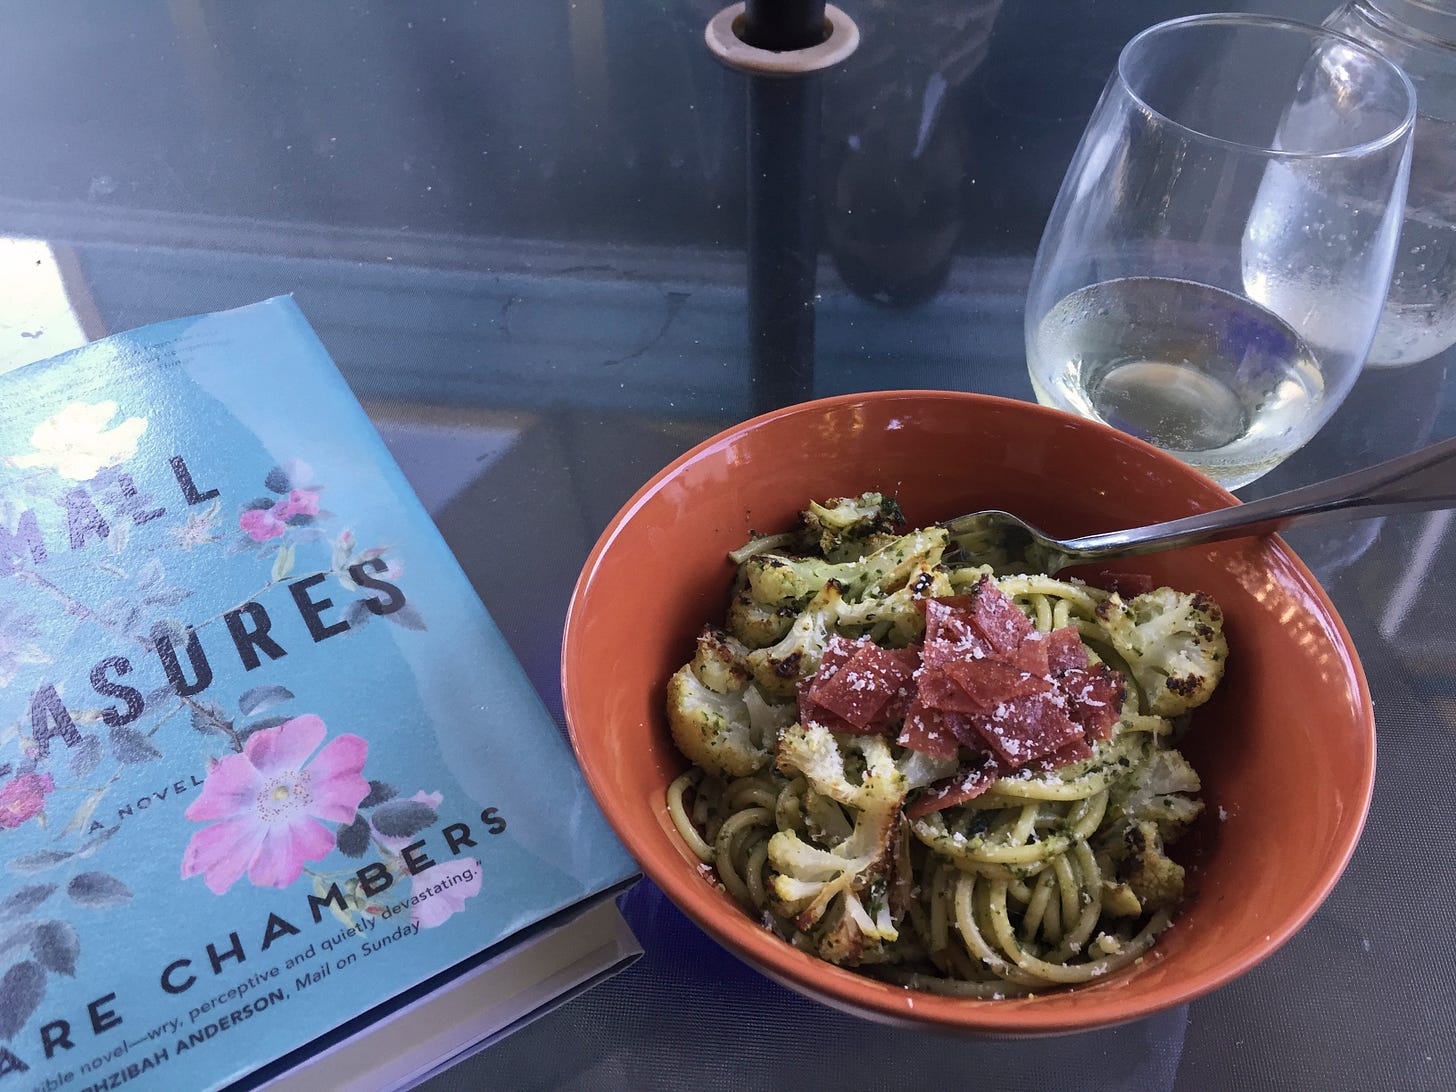 An orange bowl of pesto and cauliflower spaghetti with parmesan and pieces of salami on top sits between a blue hardcover book and a stemless glass of white wine. The book's title is "Small Pleasures".